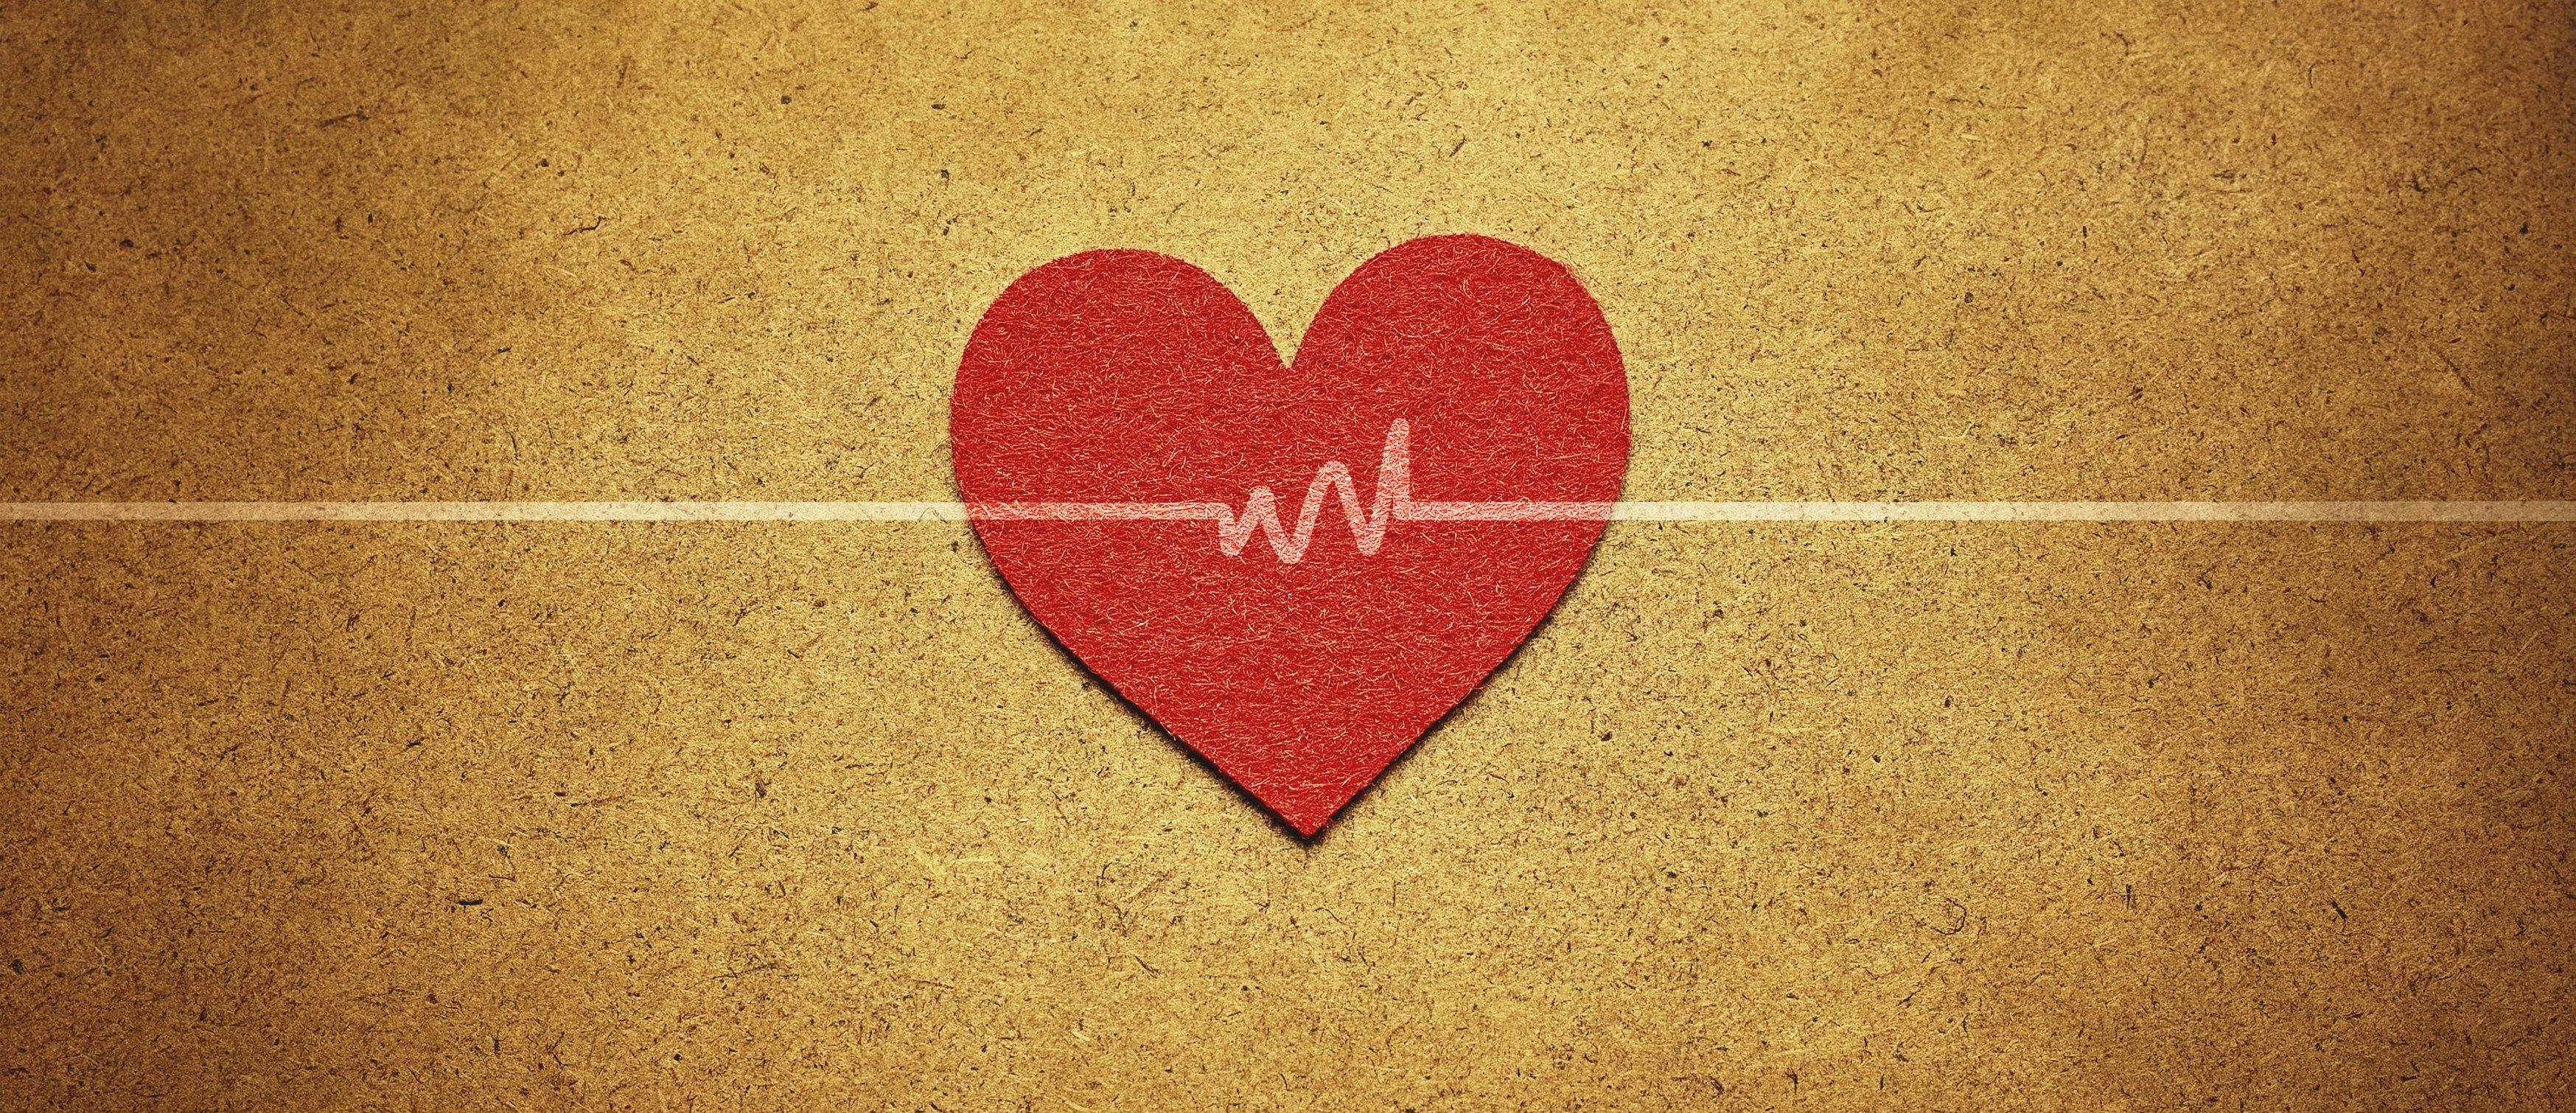 7 Simple Steps to Combat Heart Failure